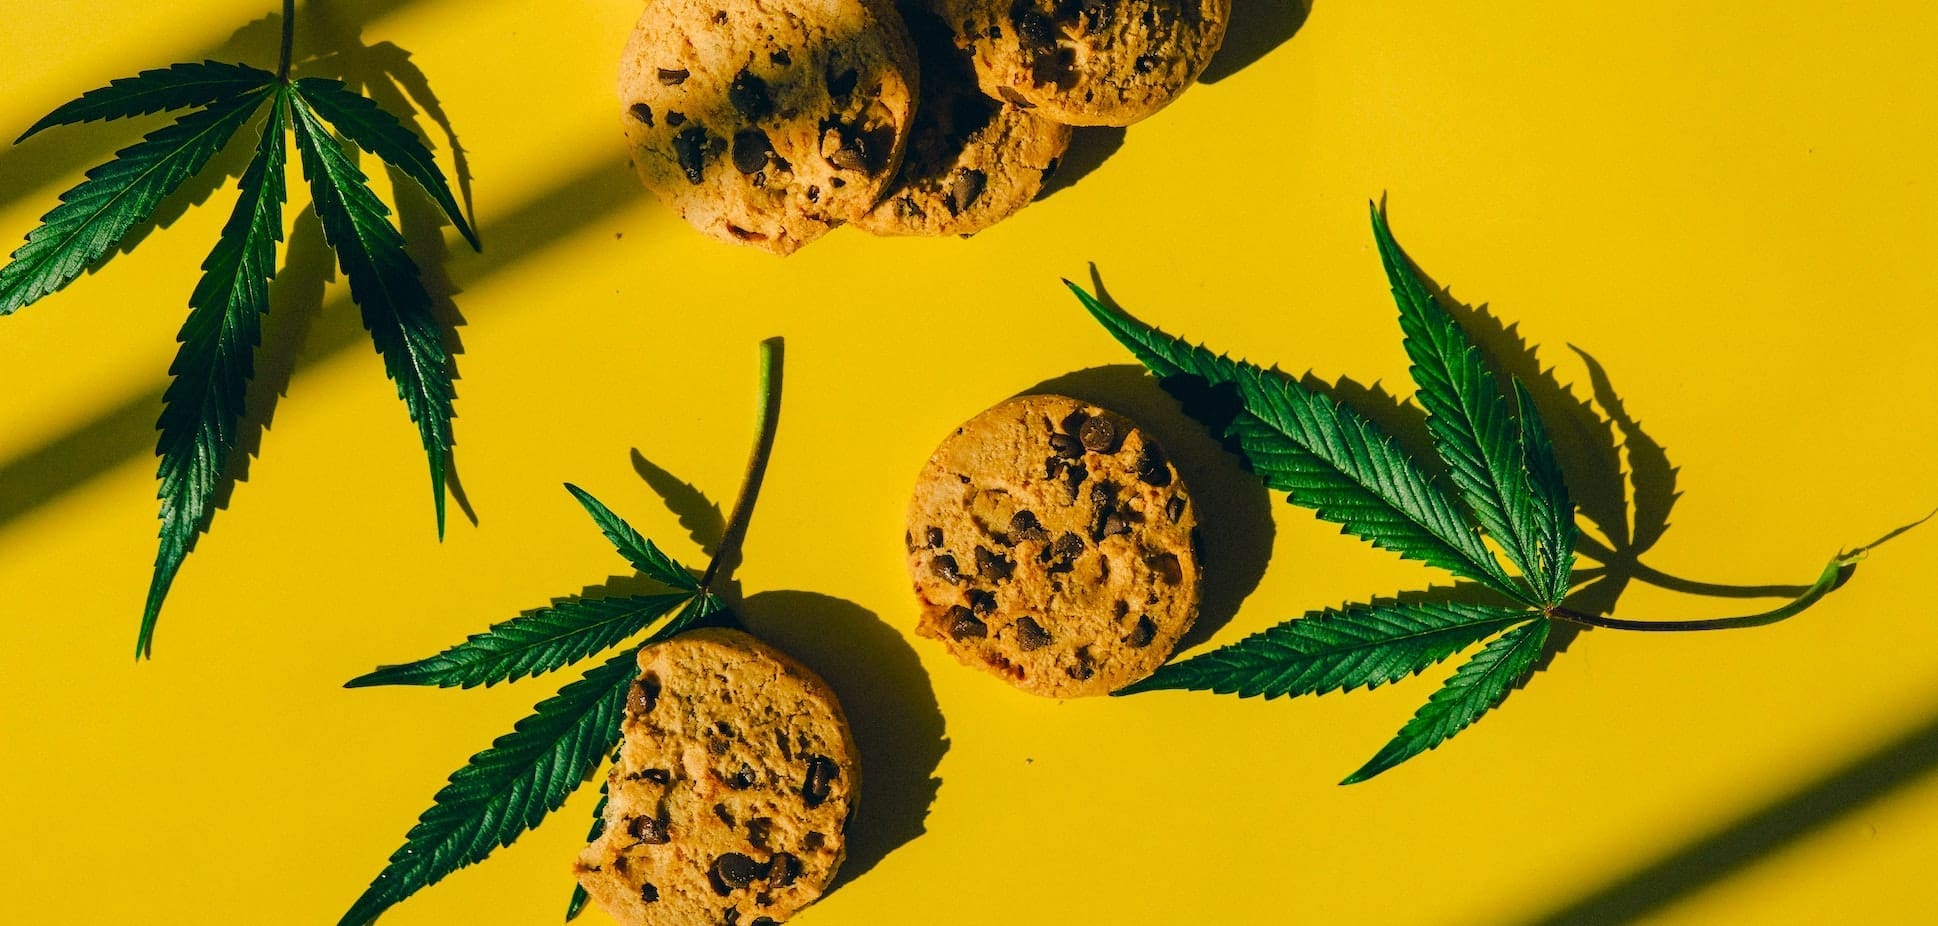 Photos of marijuana leaves and cookies by Nataliya Vaitkevich for Pexels